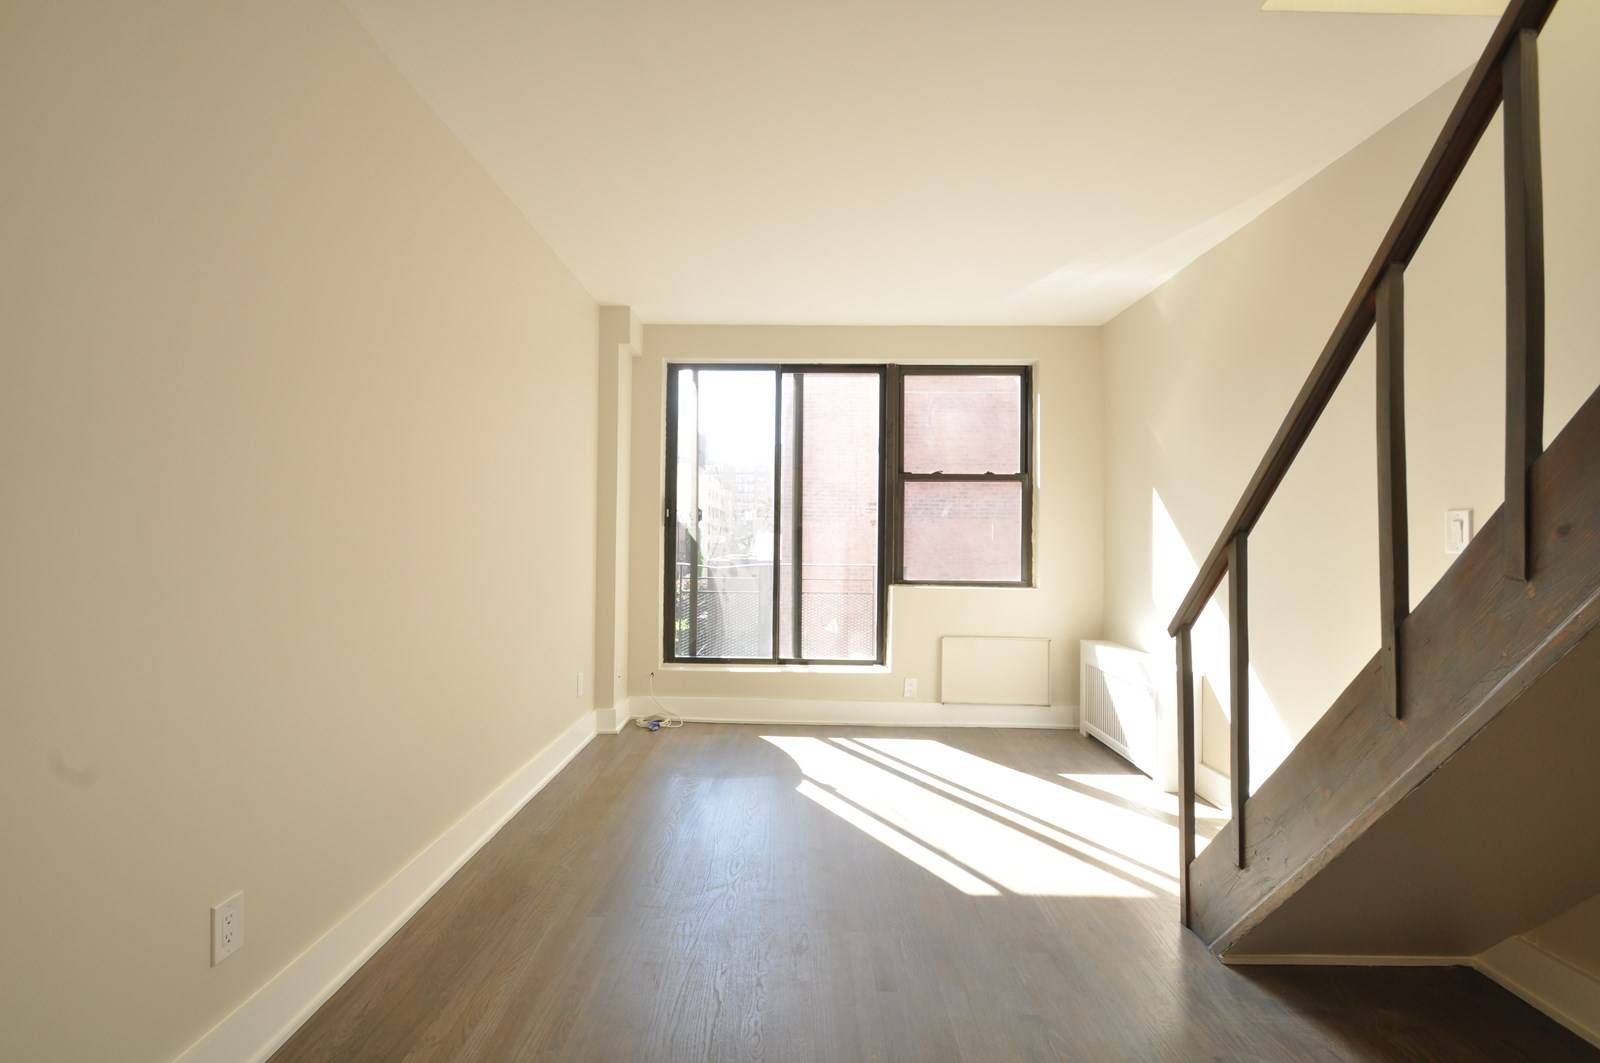 Brand new 1 Bedroom Penthouse Duplex in Murray Hill